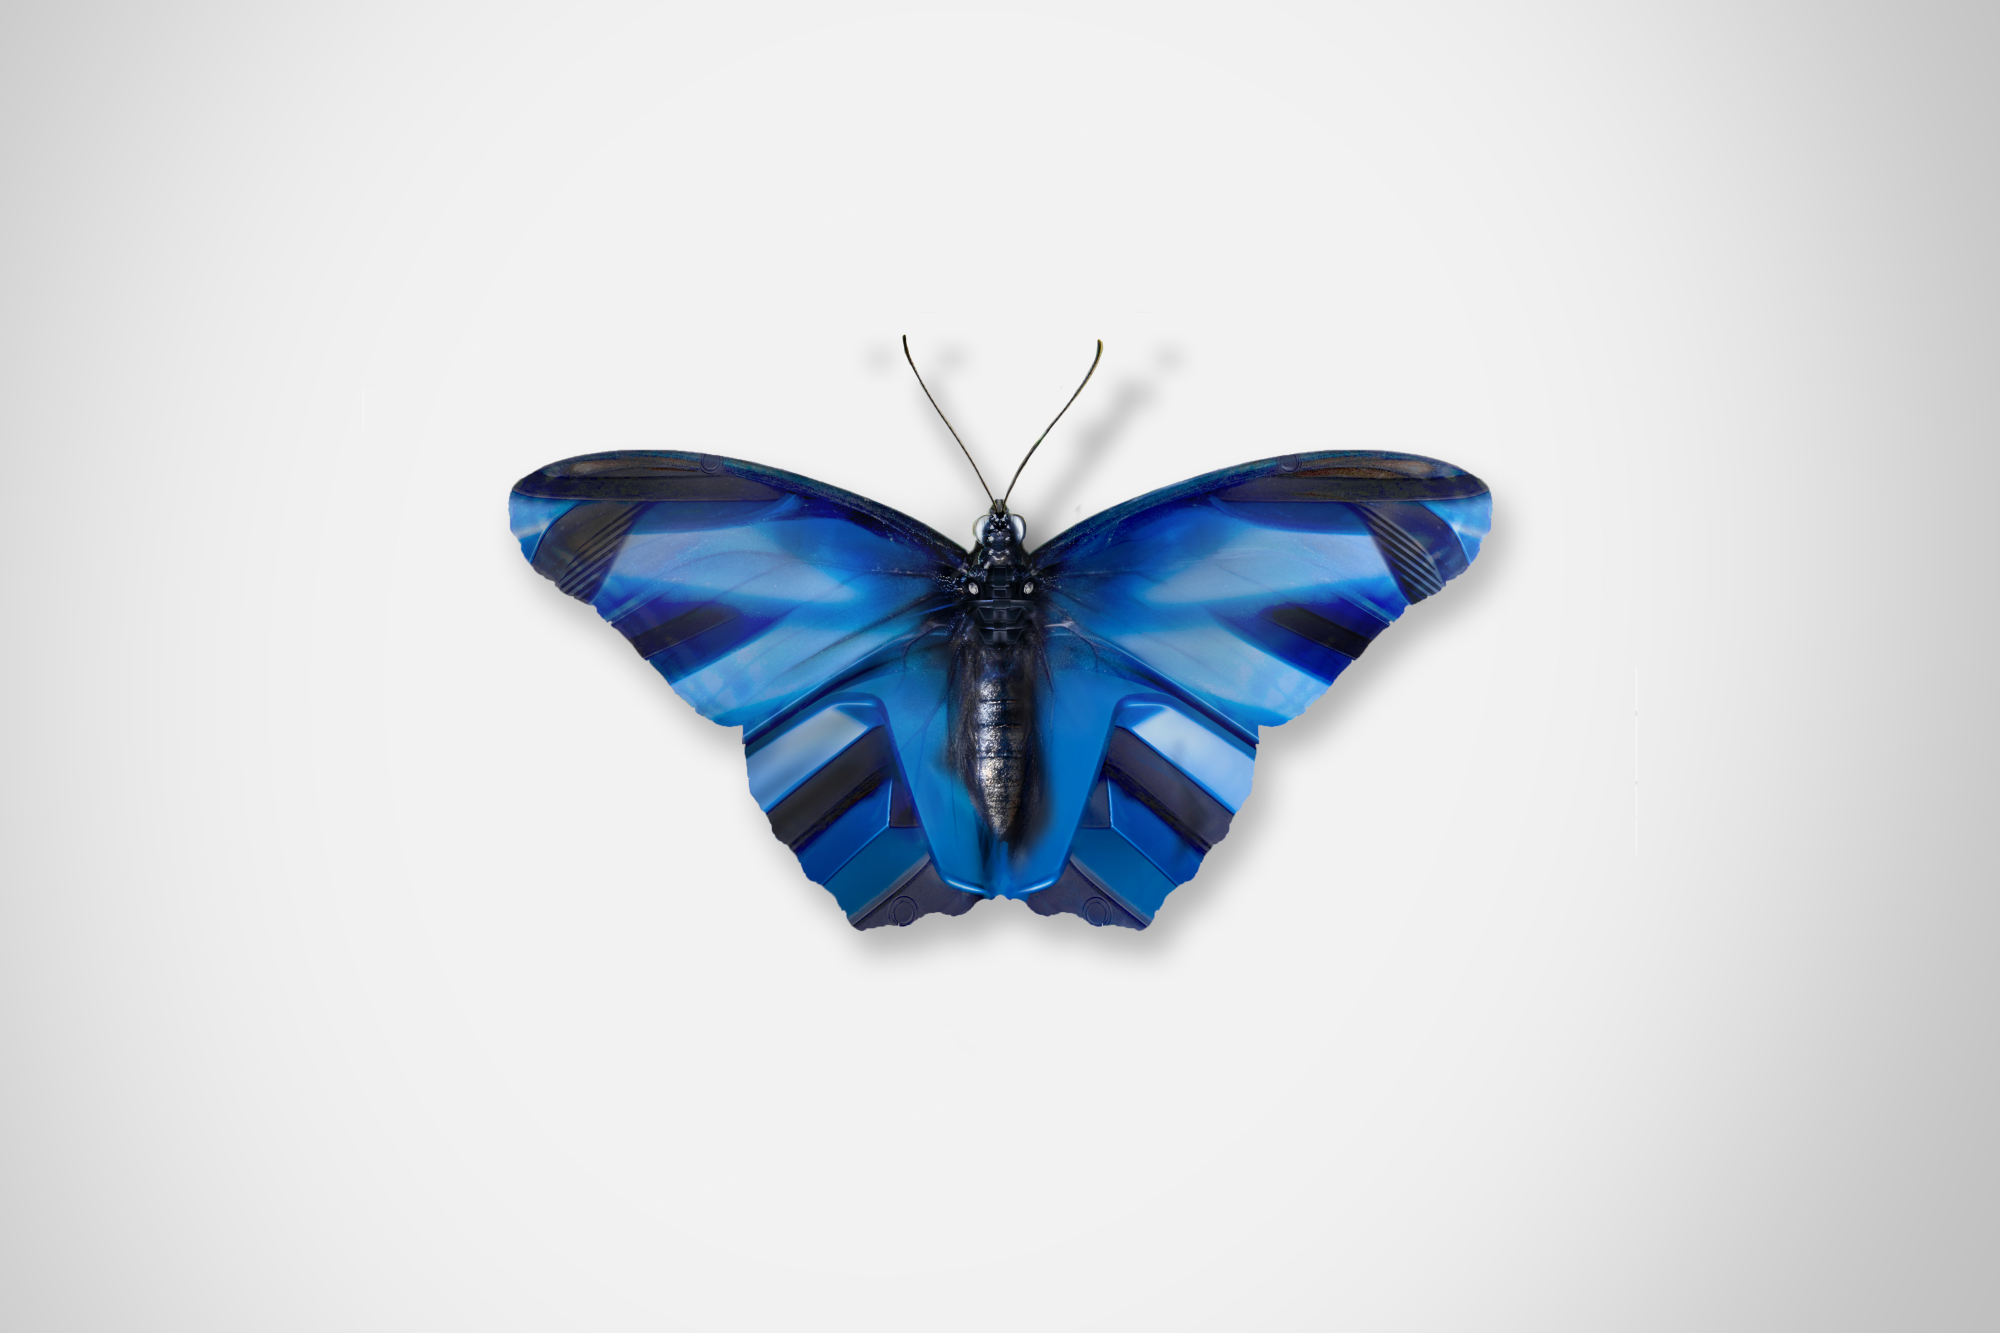 Ford_Butterflies_Concept_The_Beauty_Of_Change_DKLG_Design_002.png